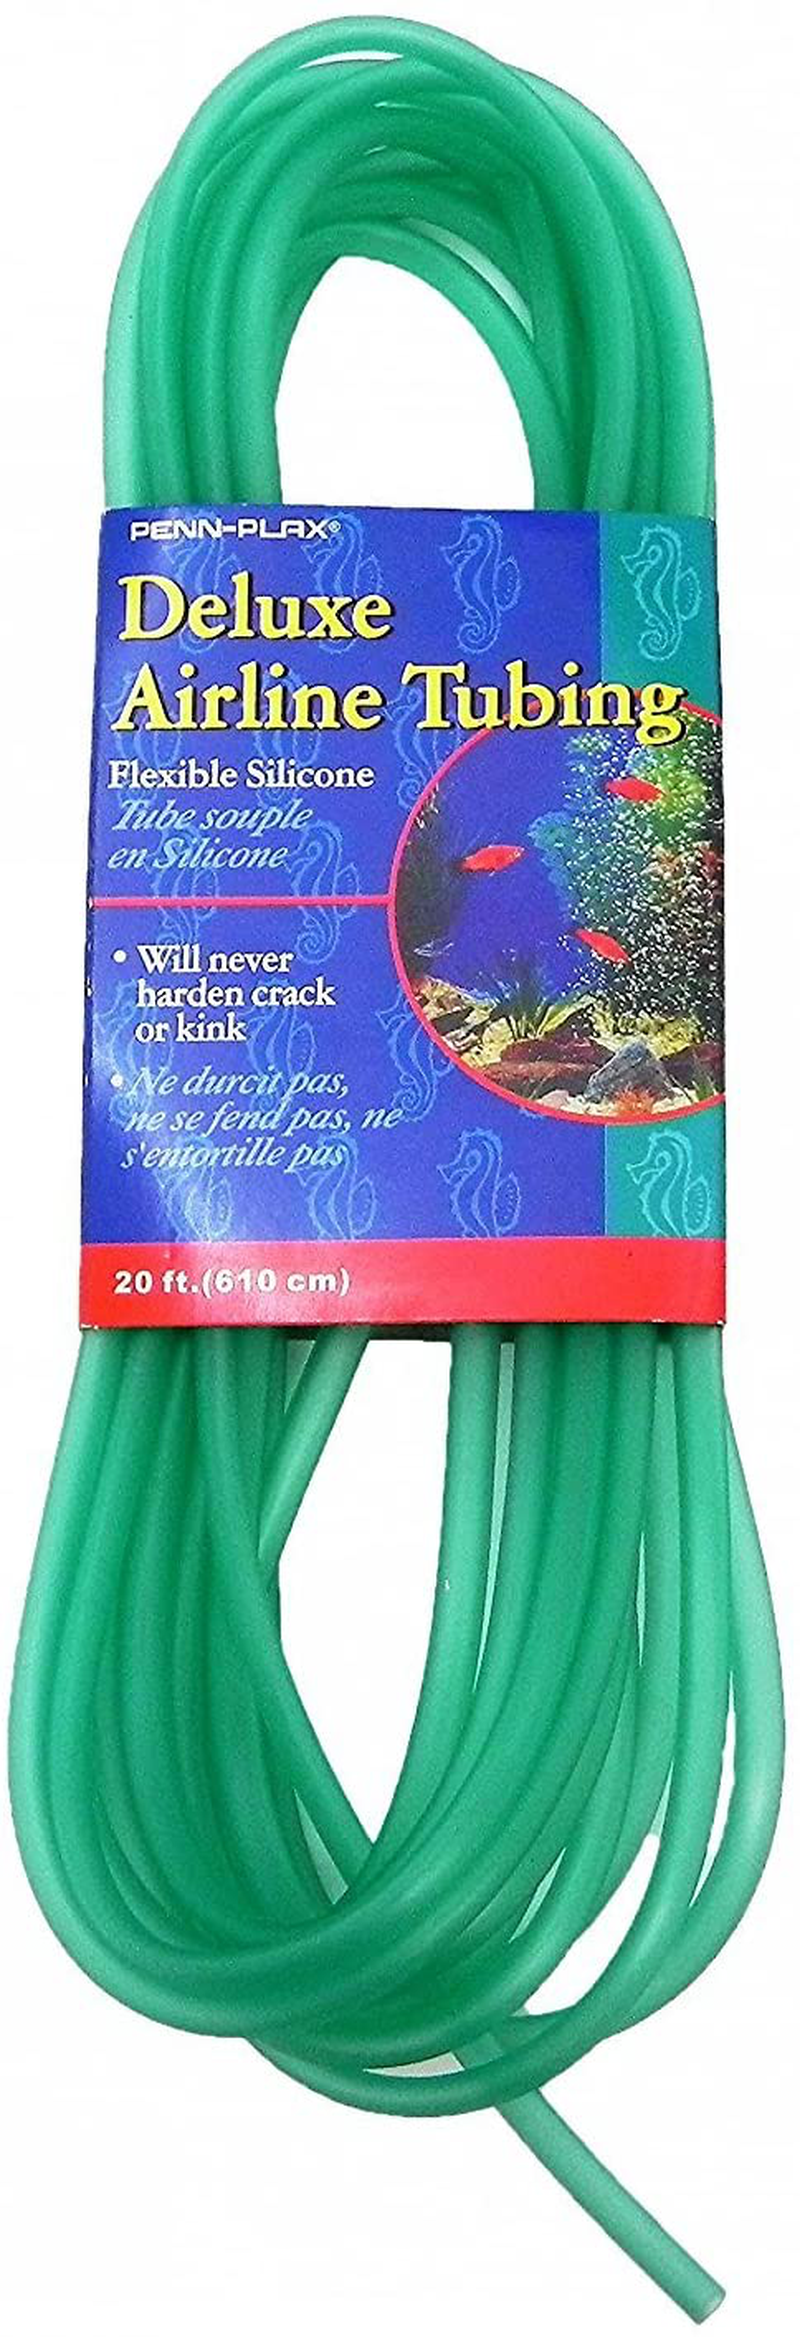 Penn Plax Deluxe Silicone Flexible Airline Tubing for Aquariums, 3/16-Inch, 20 Feet